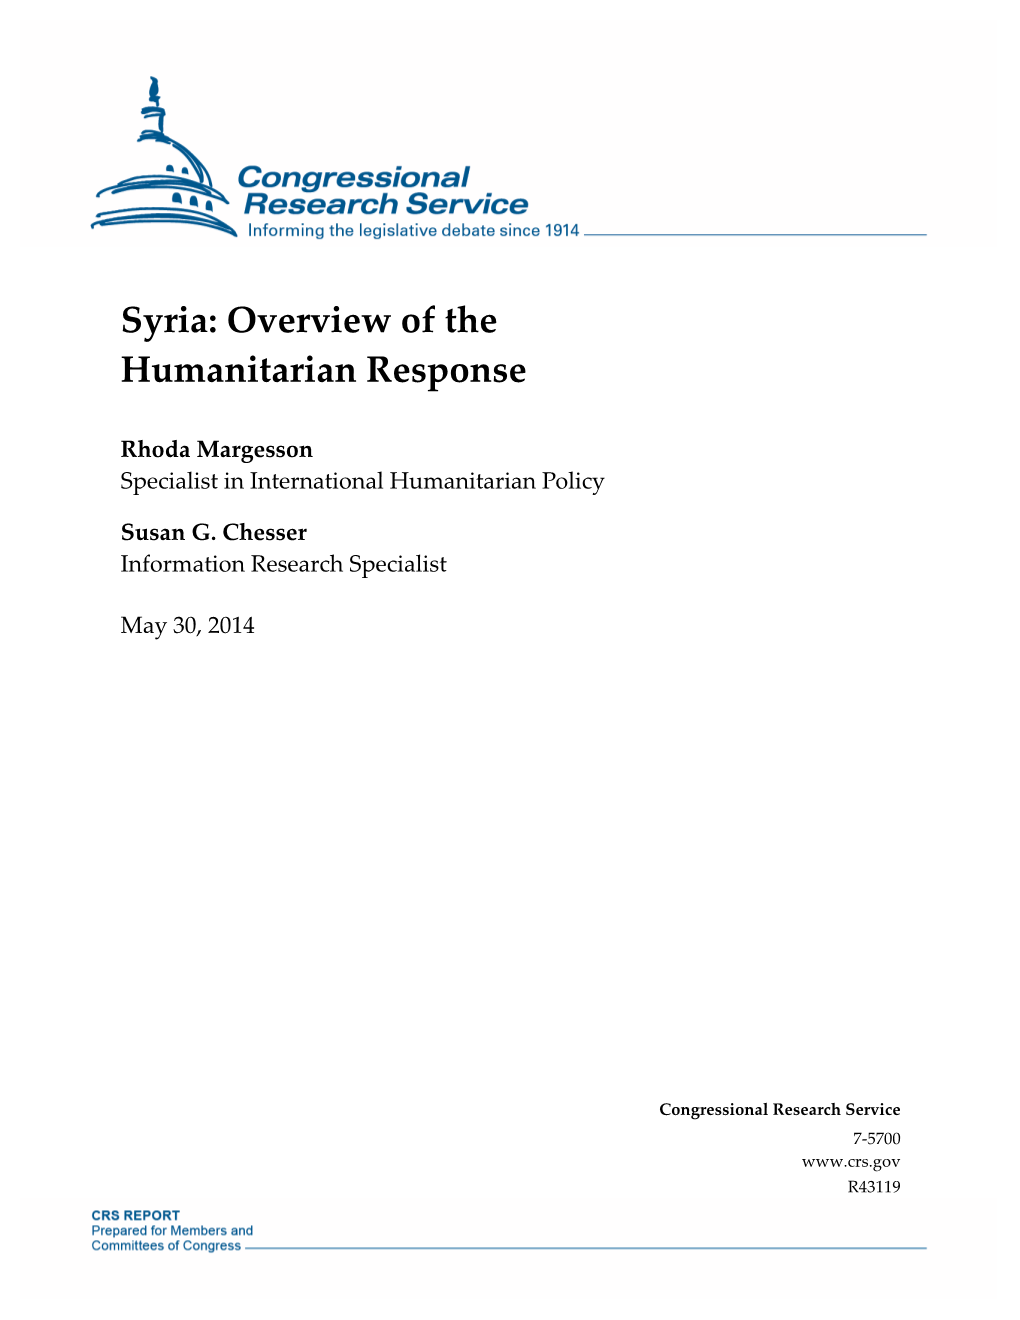 Syria: Overview of the Humanitarian Response